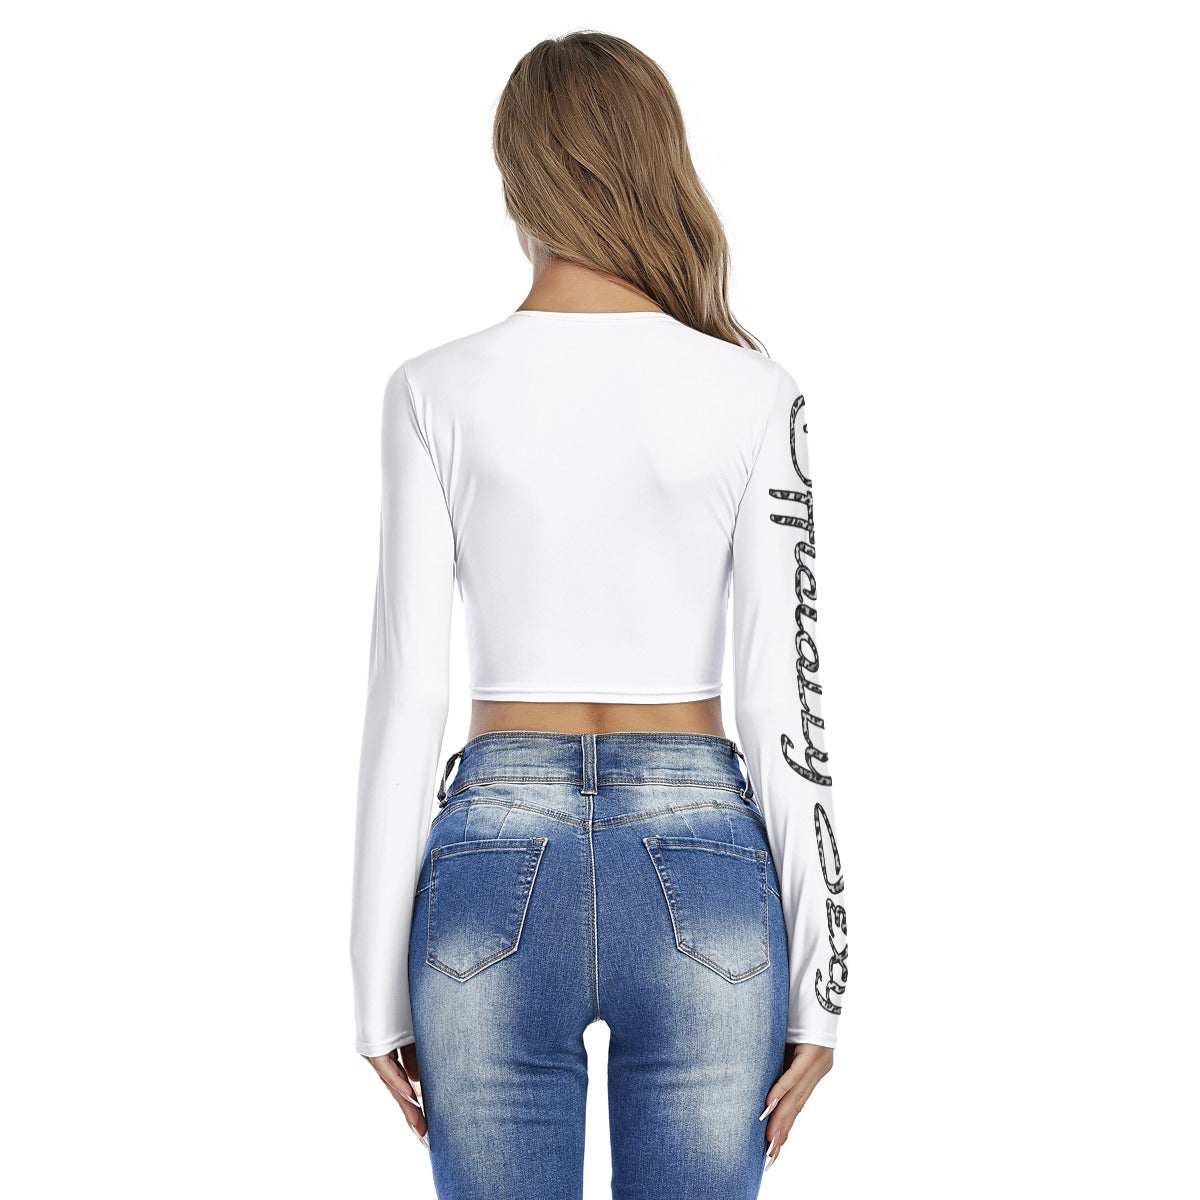 Officially Sexy Snow Leopard Print Collection Women's White Round Neck Crop Top Long Sleeve T-Shirt (English) 3